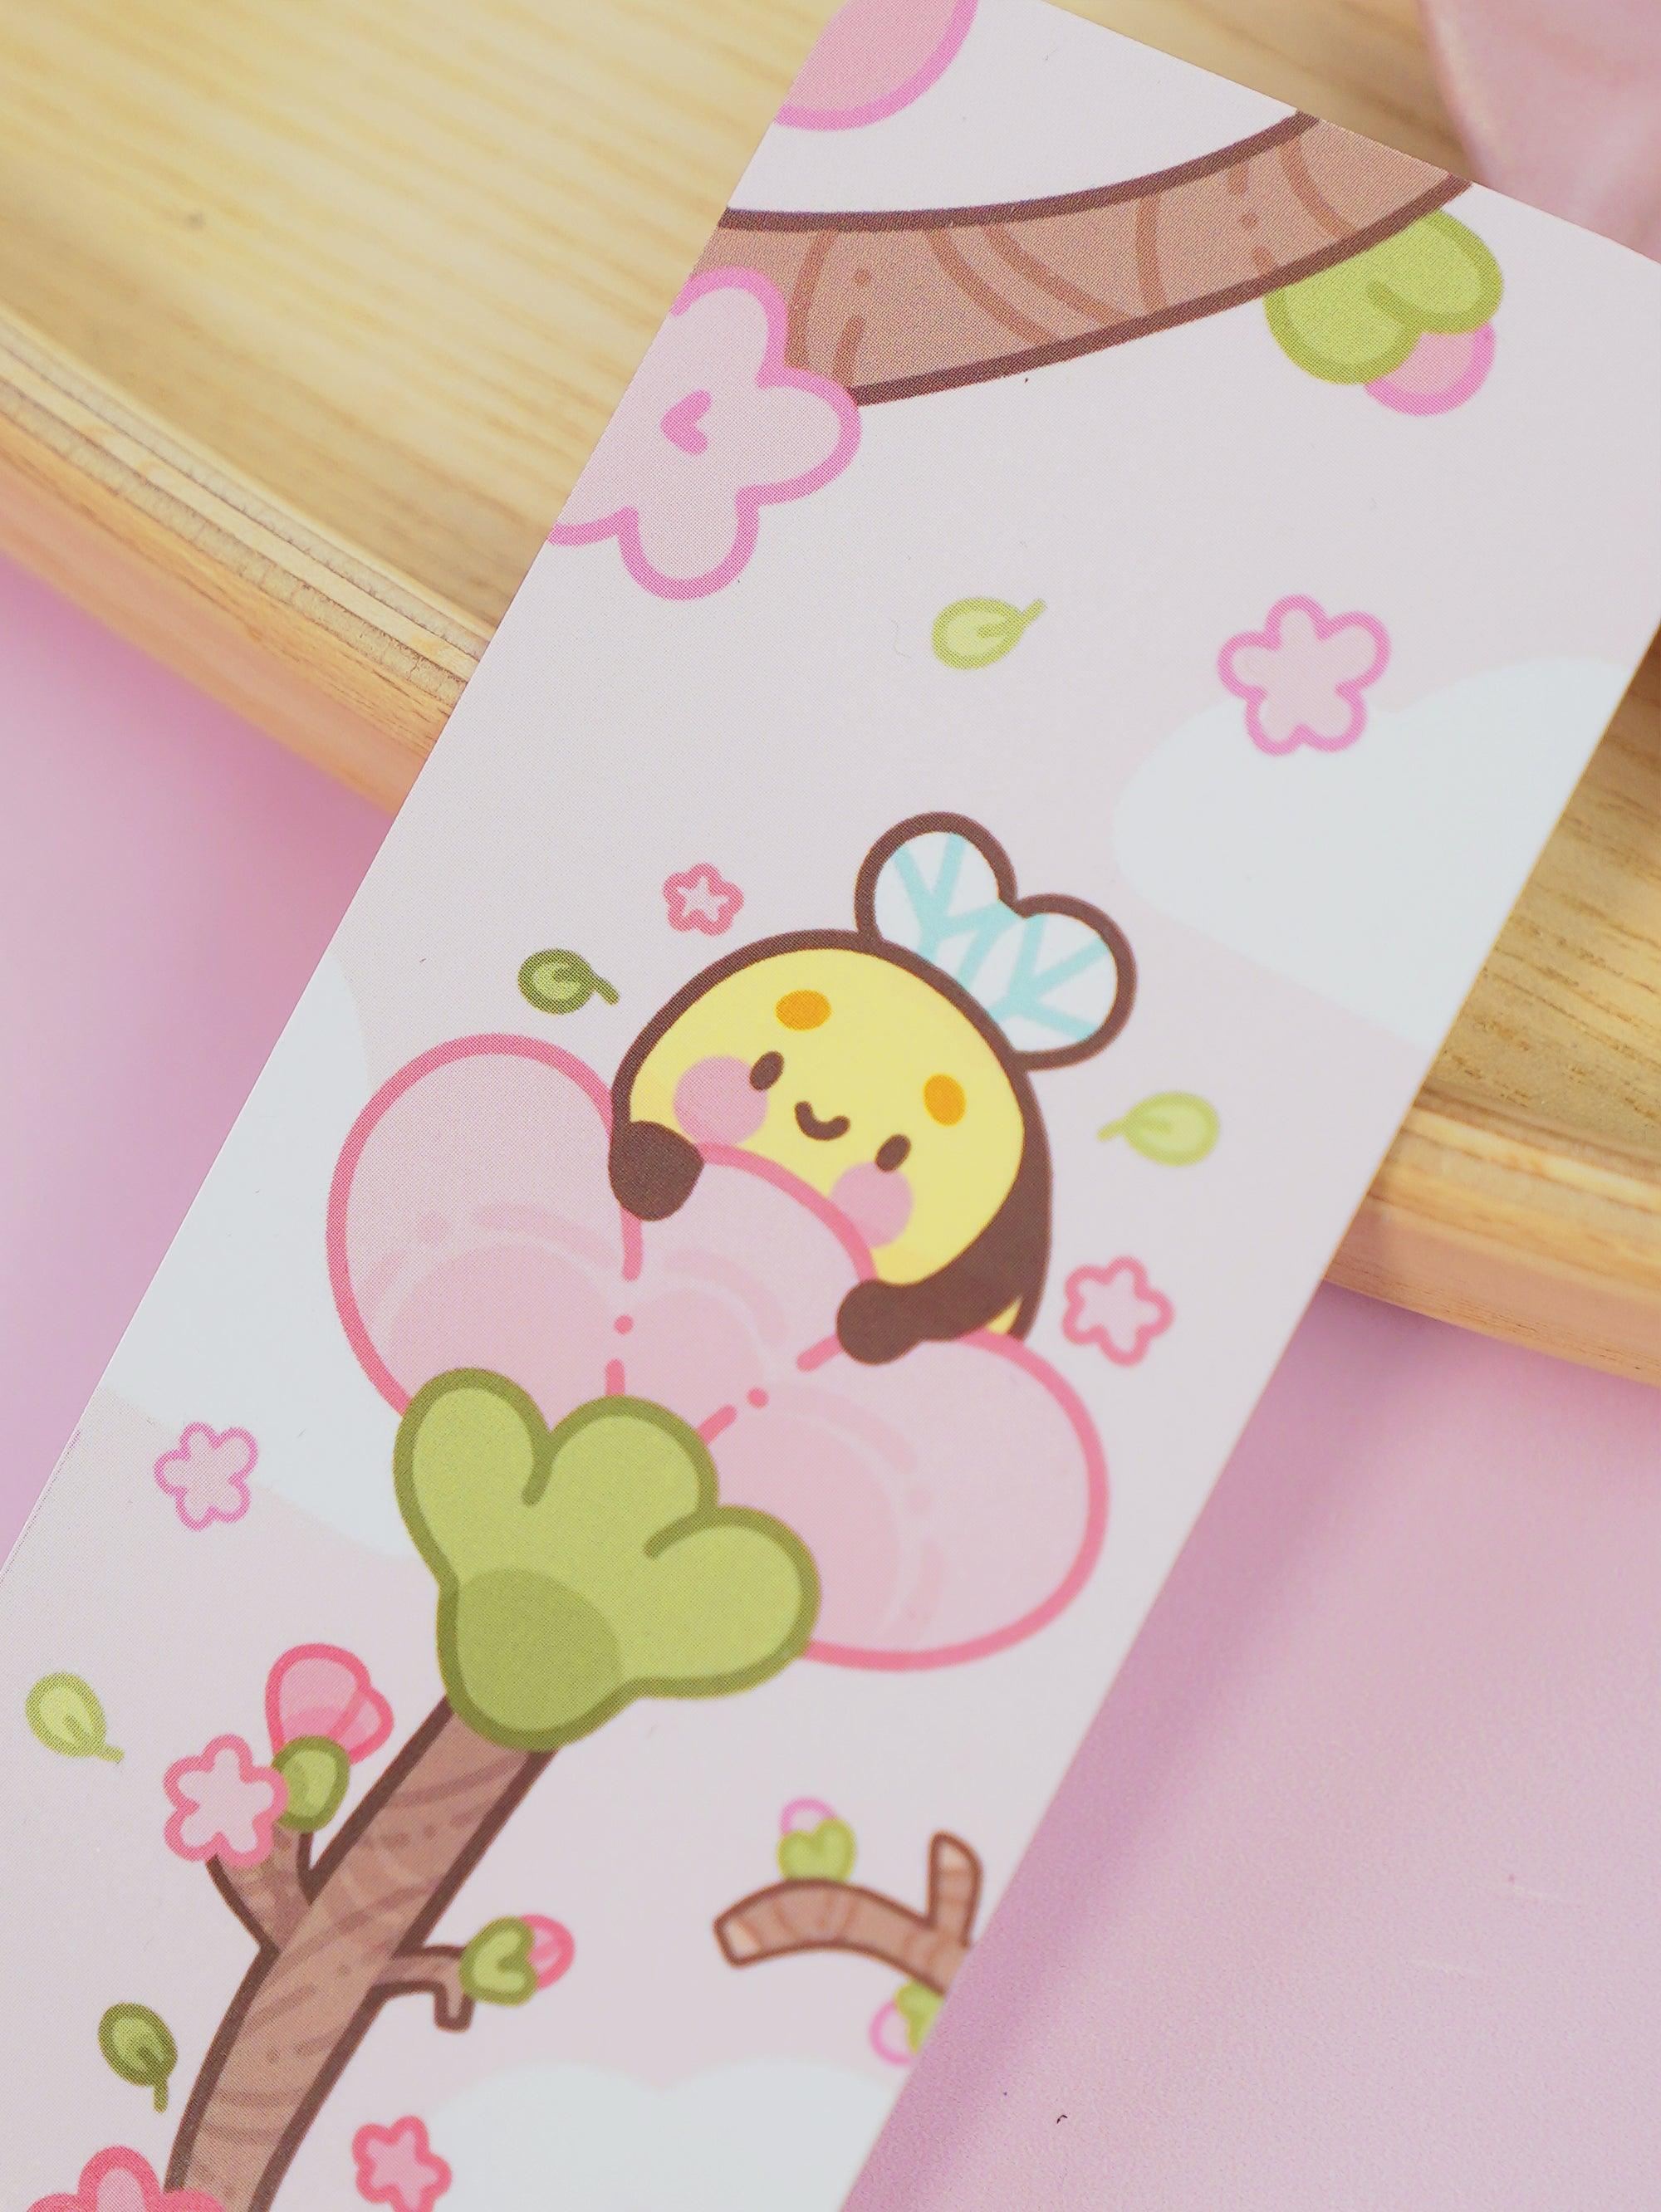 Charming Bumblebutt Bee and Cherry Blossom Flower Bookmark - Katnipp Studios